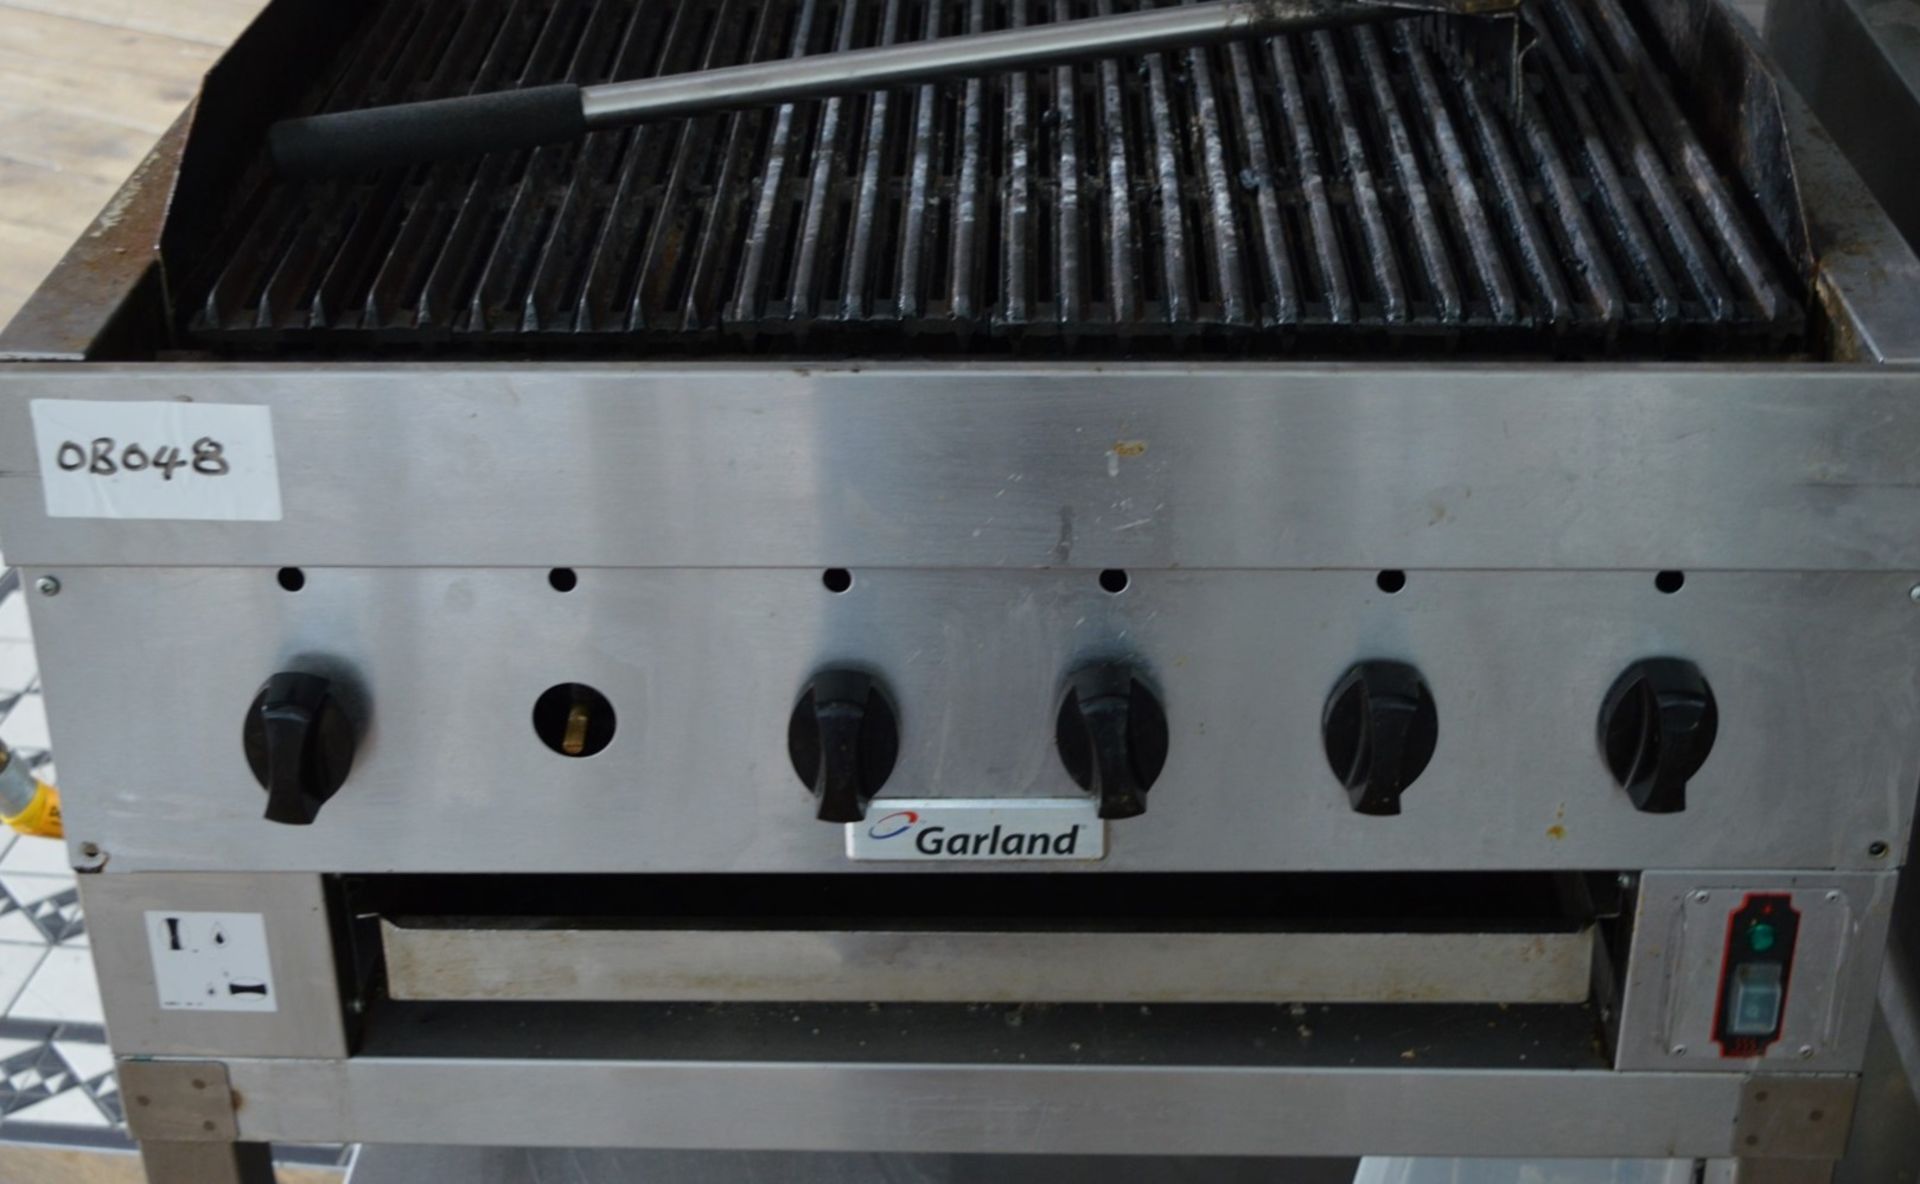 1 x Garland Stainless Steel Griddle With Stand - H91 x W85 x D75cms - CL245 - Dual Fuel Gas and - Image 2 of 8